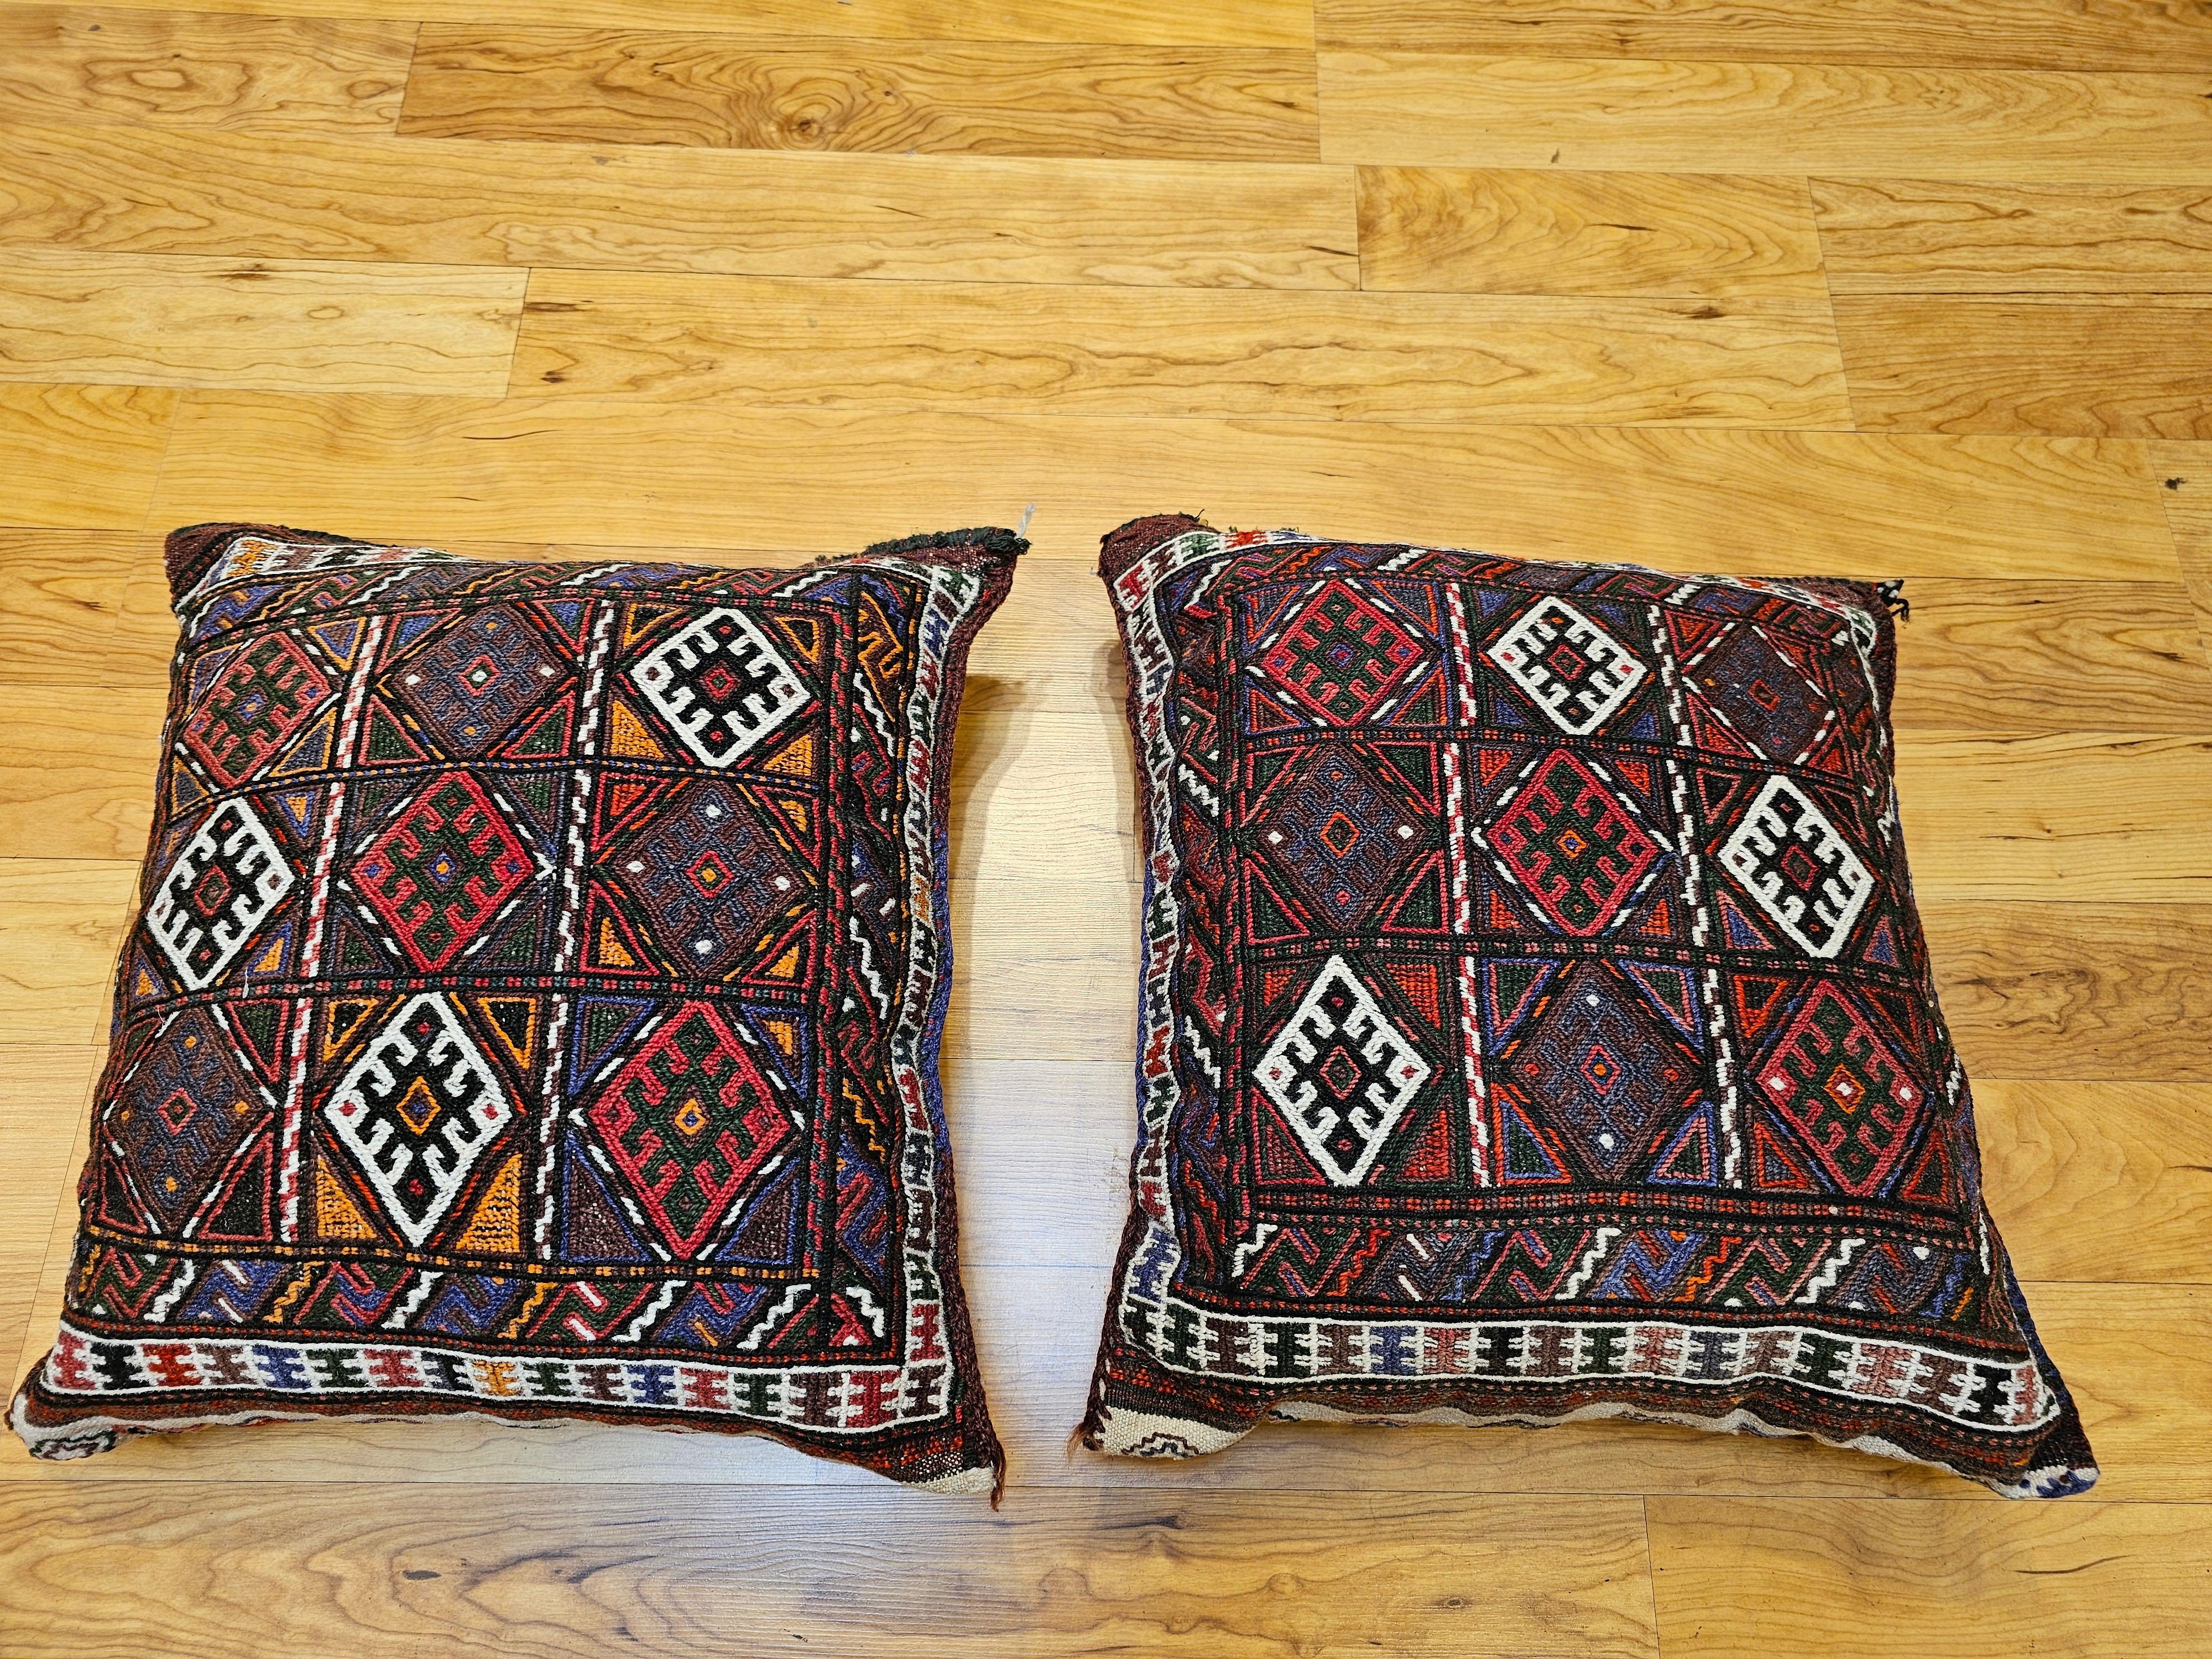 Pair of beautiful hand sewn pillows made from antique Kurdish saddlebags that were made in the early 1900s. Each pillow has a hand knotted rug with a geometric 3 x 3 star design for the face of the pillow in red, ivory, green, and purple.  The back